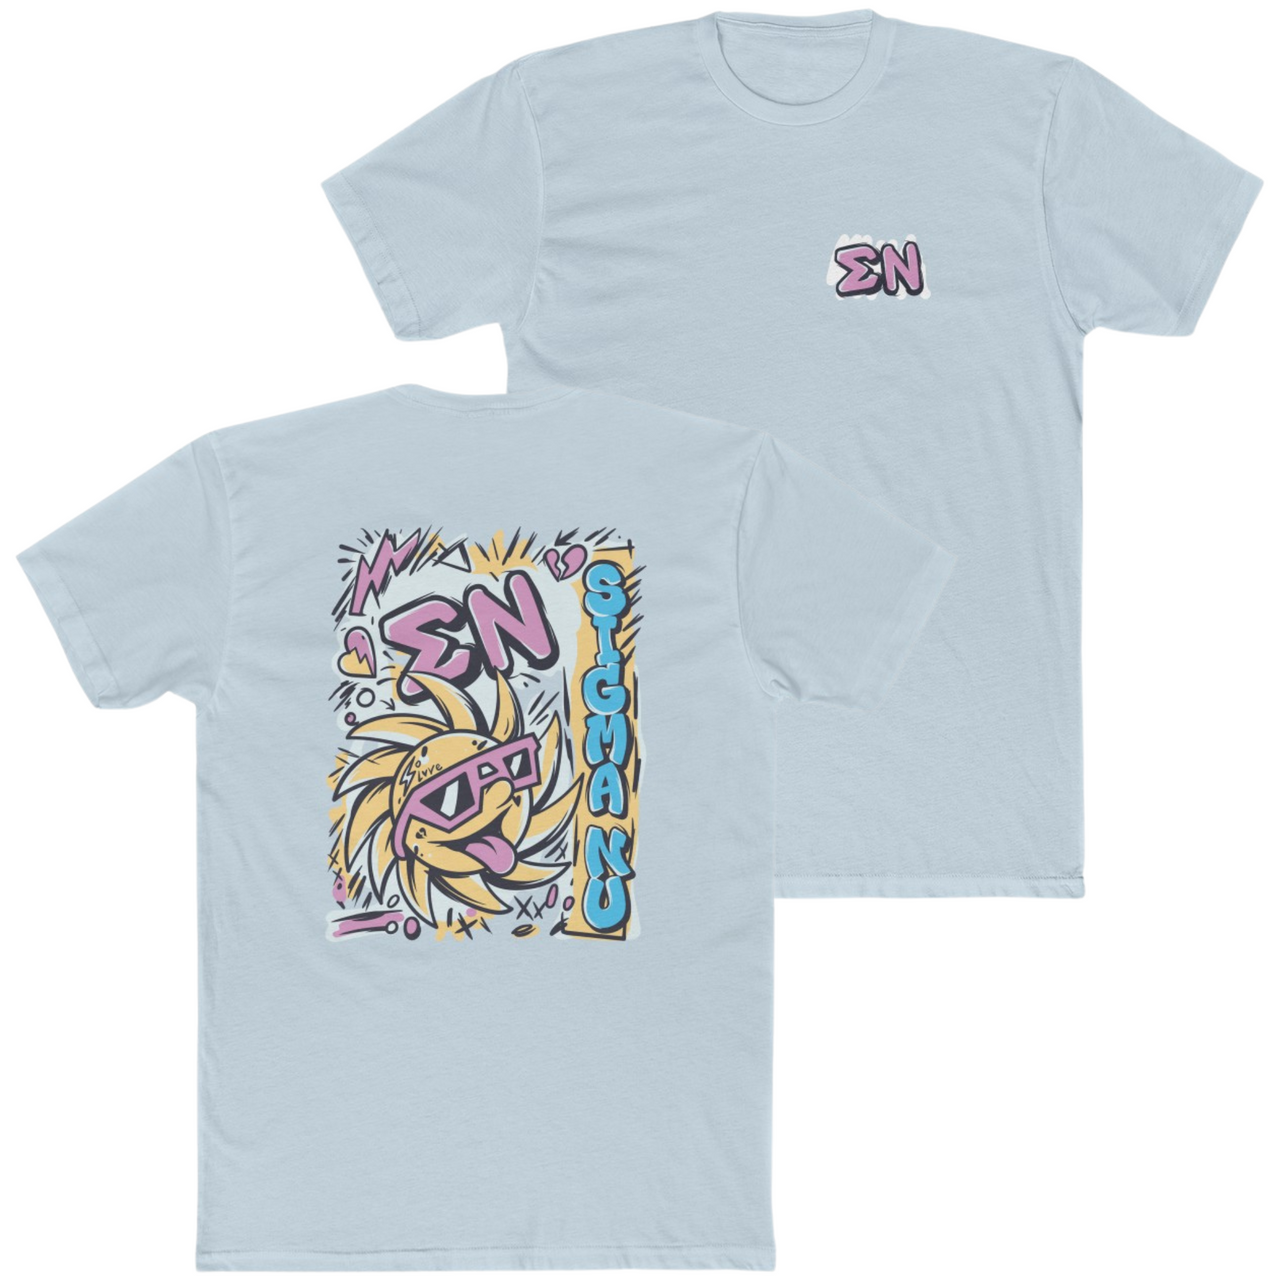 Light Blue Sigma Nu Graphic T-Shirt | Fun in the Sun | Sigma Nu Clothing, Apparel and Merchandise